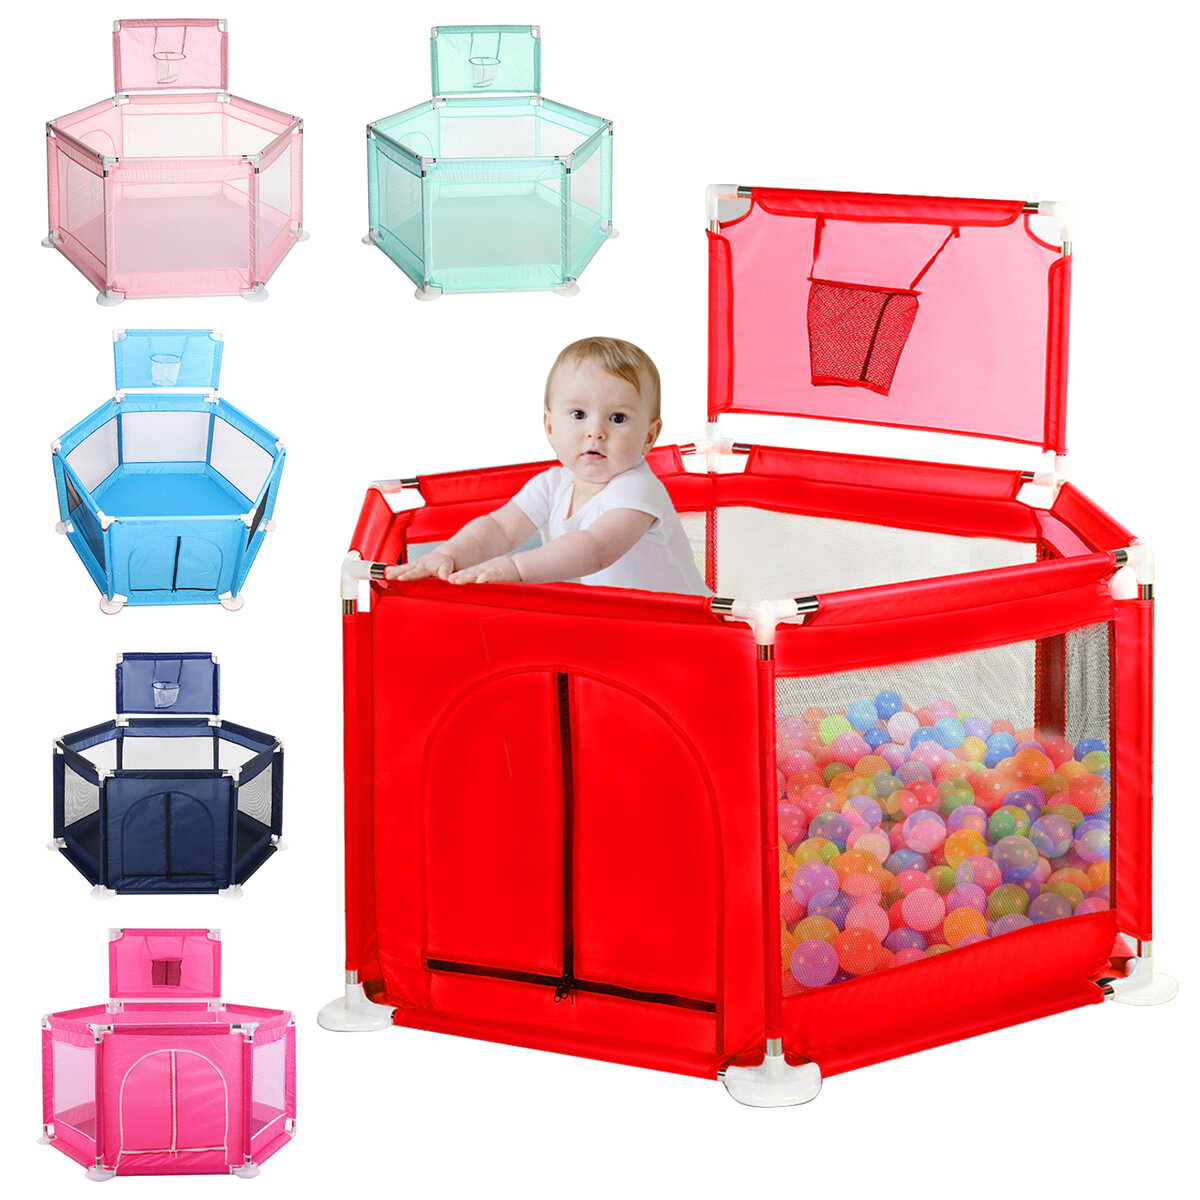 Image of Playpen For Children Infant Fence Safety Barriers Children's Ball Pool Baby Playground Gym with Basketball Field